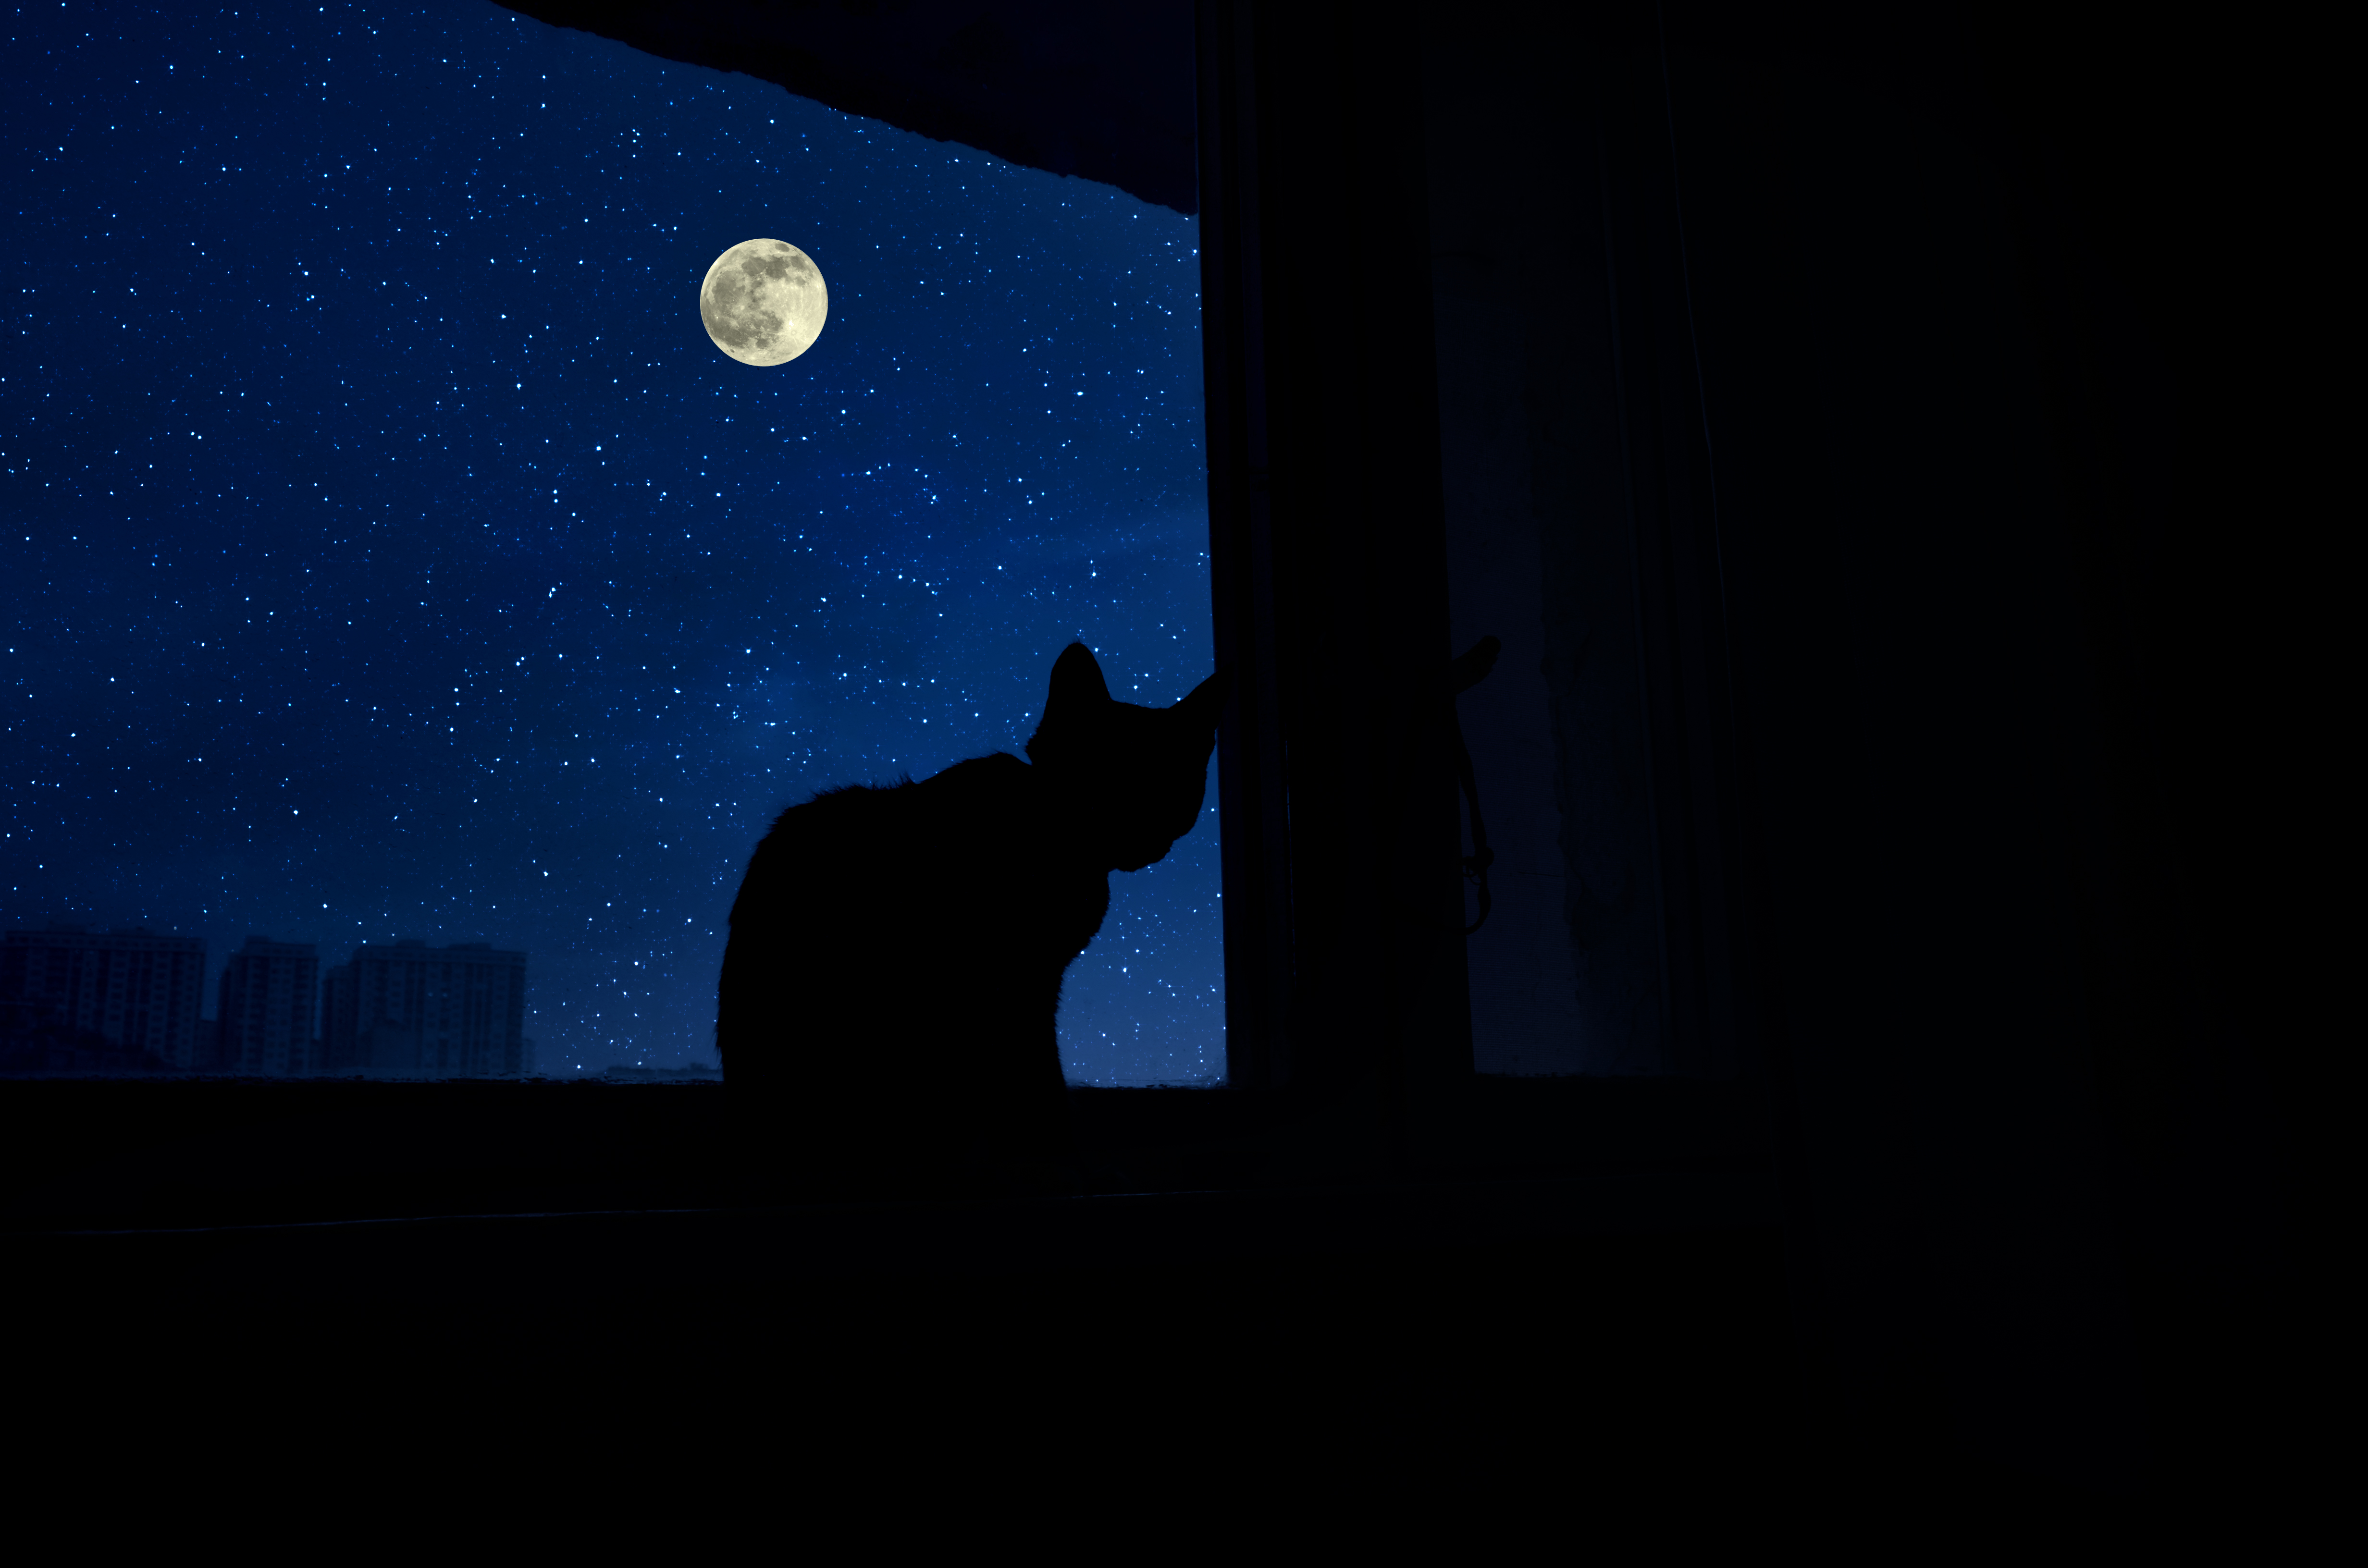 A cat's shadow in the window on a clear night with the full moon overhead